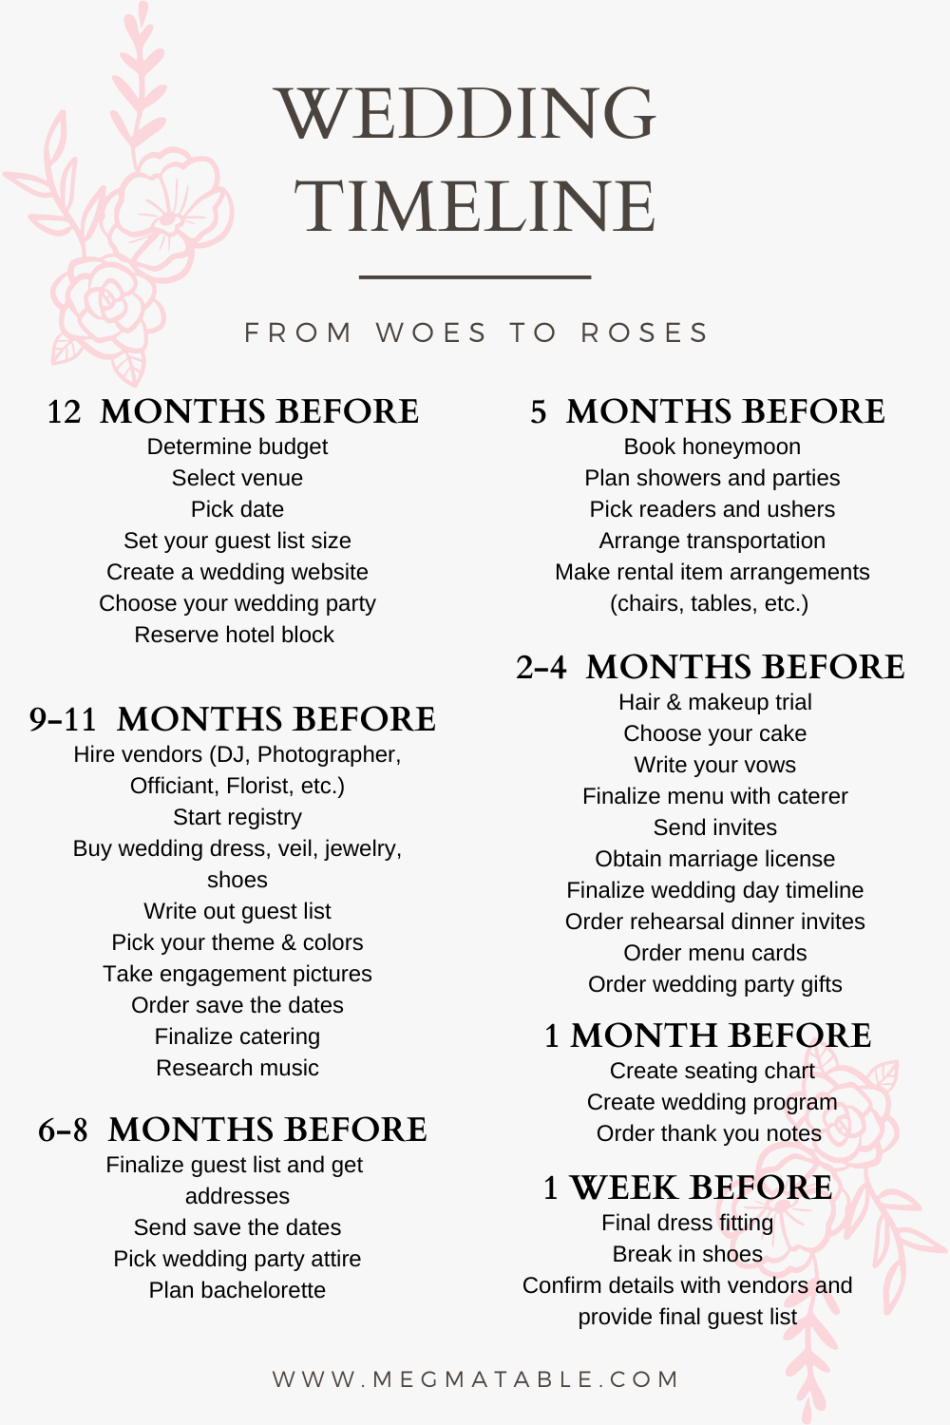 Costum Wedding Timeline  From Woes To Roses  Megmatable Pdf